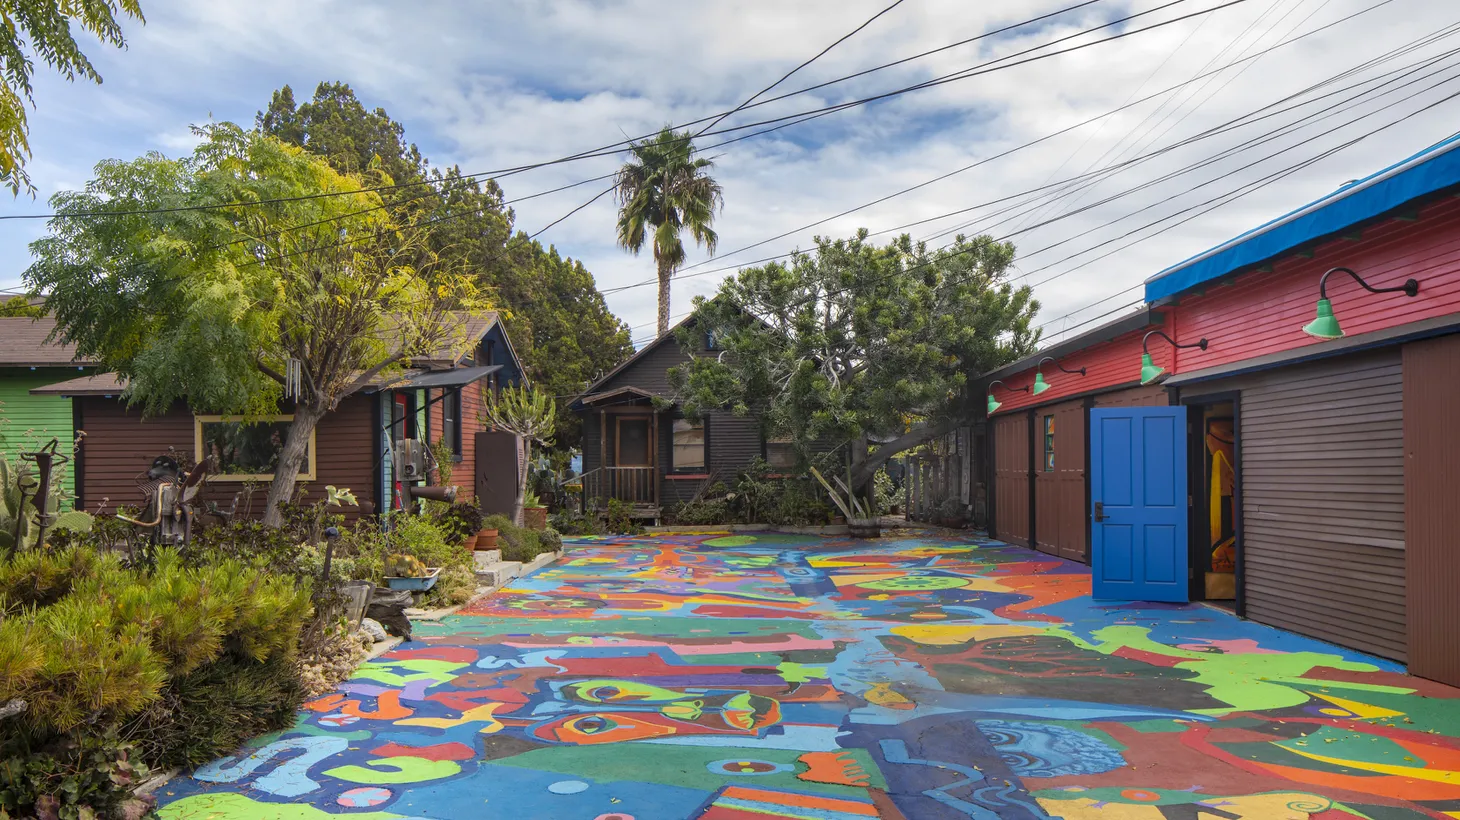 The driveway and gathering space at St. Elmo Village was created by artists Rozzell Sykes and Roderick Sykes as a nonprofit rental complex focused on the arts and community engagement.